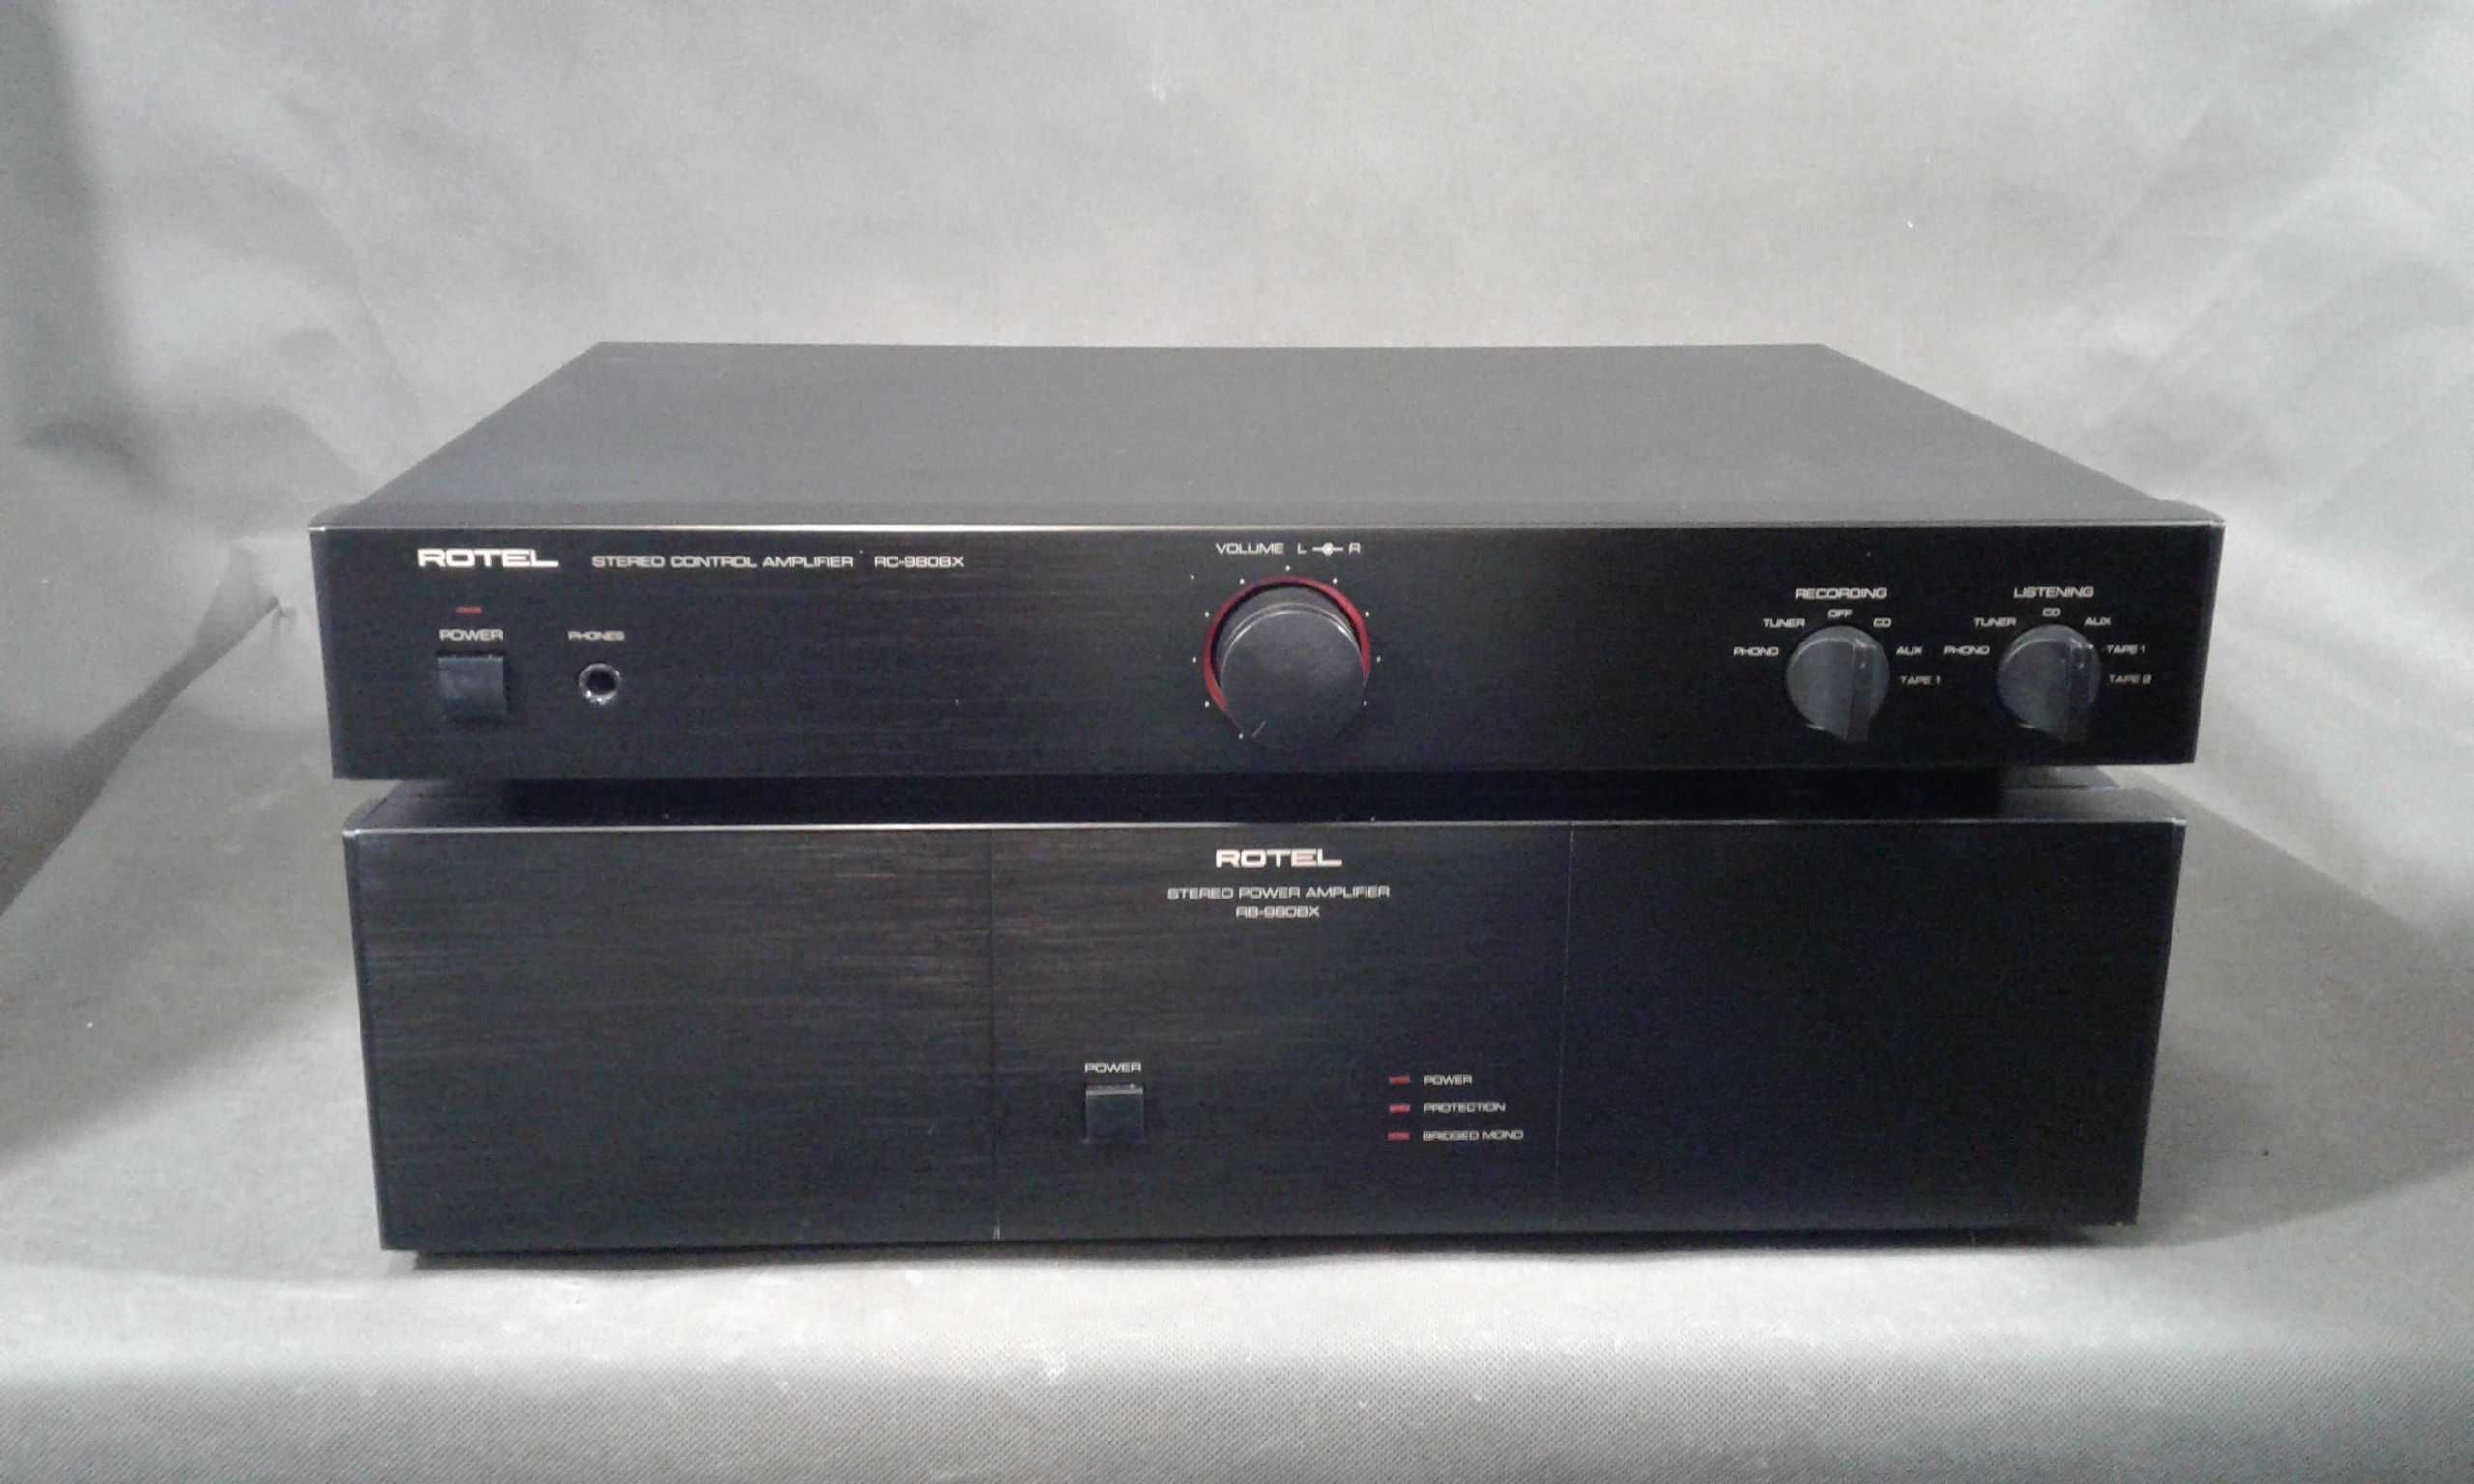 ROTEL RC-980BX,RB-980BX,zestaw stereo